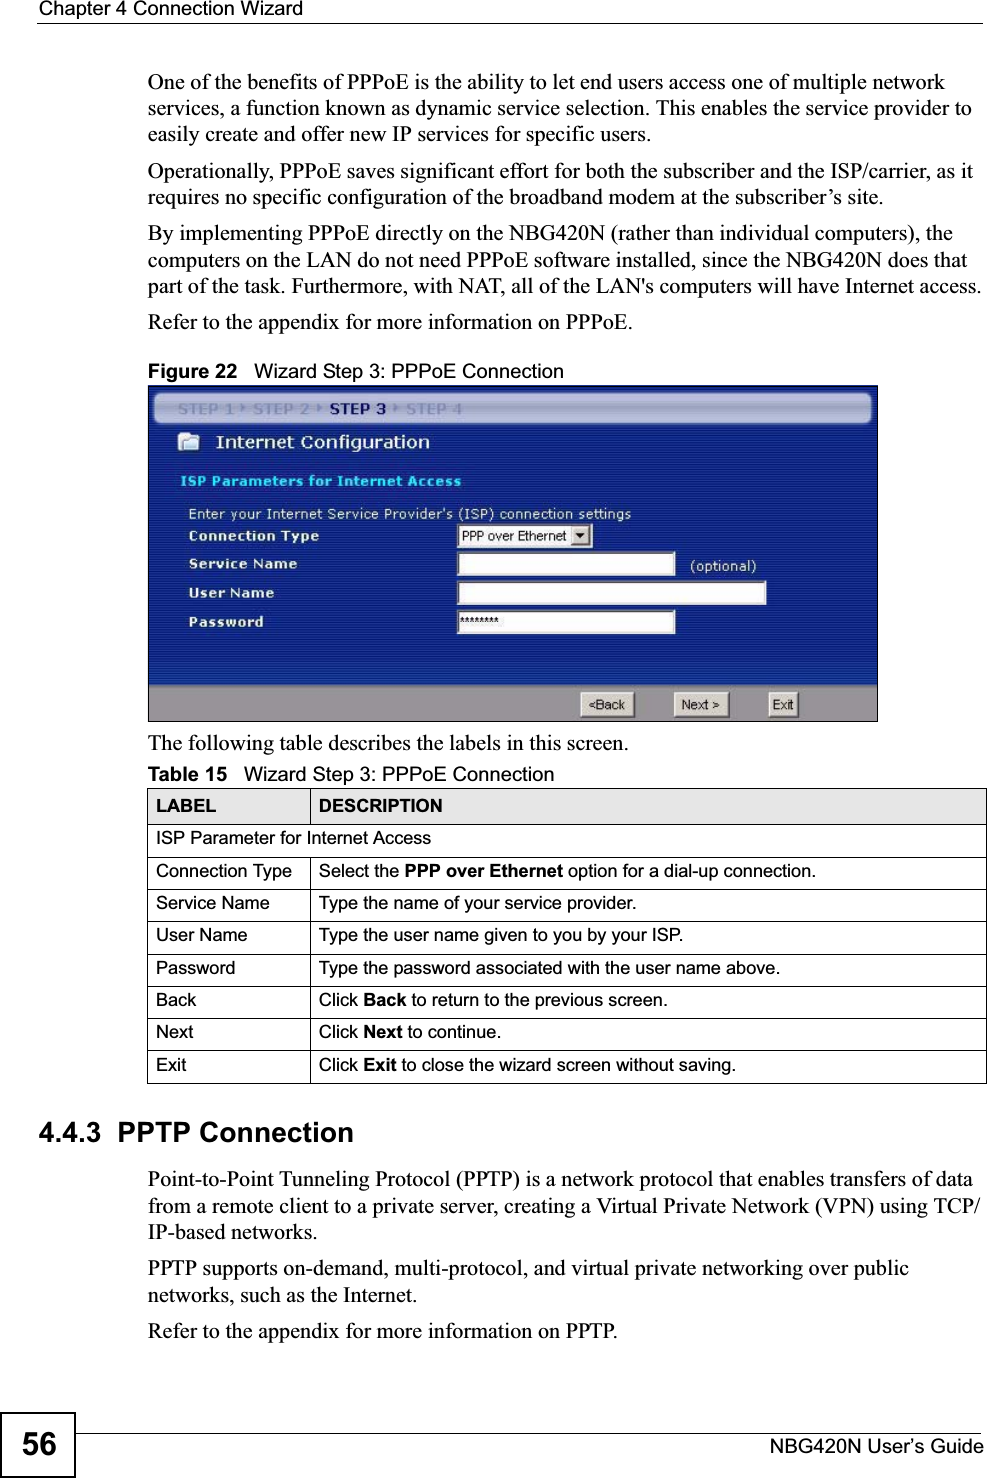 Chapter 4 Connection WizardNBG420N User’s Guide56One of the benefits of PPPoE is the ability to let end users access one of multiple network services, a function known as dynamic service selection. This enables the service provider to easily create and offer new IP services for specific users.Operationally, PPPoE saves significant effort for both the subscriber and the ISP/carrier, as it requires no specific configuration of the broadband modem at the subscriber’s site.By implementing PPPoE directly on the NBG420N (rather than individual computers), the computers on the LAN do not need PPPoE software installed, since the NBG420N does that part of the task. Furthermore, with NAT, all of the LAN&apos;s computers will have Internet access.Refer to the appendix for more information on PPPoE.Figure 22   Wizard Step 3: PPPoE ConnectionThe following table describes the labels in this screen.4.4.3  PPTP ConnectionPoint-to-Point Tunneling Protocol (PPTP) is a network protocol that enables transfers of data from a remote client to a private server, creating a Virtual Private Network (VPN) using TCP/IP-based networks.PPTP supports on-demand, multi-protocol, and virtual private networking over public networks, such as the Internet.Refer to the appendix for more information on PPTP.Table 15   Wizard Step 3: PPPoE ConnectionLABEL DESCRIPTIONISP Parameter for Internet AccessConnection Type Select the PPP over Ethernet option for a dial-up connection.Service Name  Type the name of your service provider.User Name Type the user name given to you by your ISP. Password  Type the password associated with the user name above.Back Click Back to return to the previous screen. Next Click Next to continue. Exit Click Exit to close the wizard screen without saving.